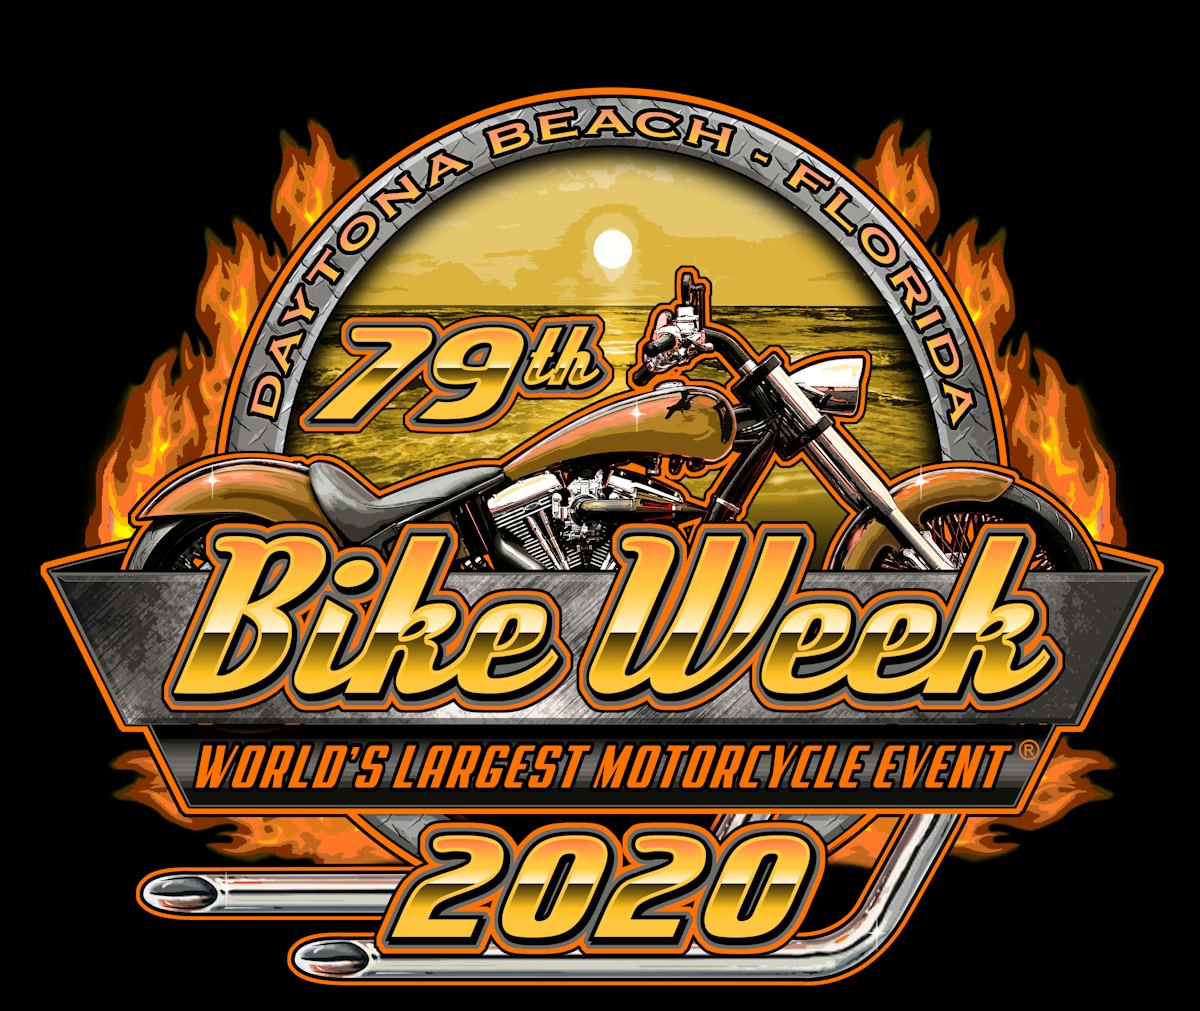 Bike Week prompts parking change at one Love’s Truckers News